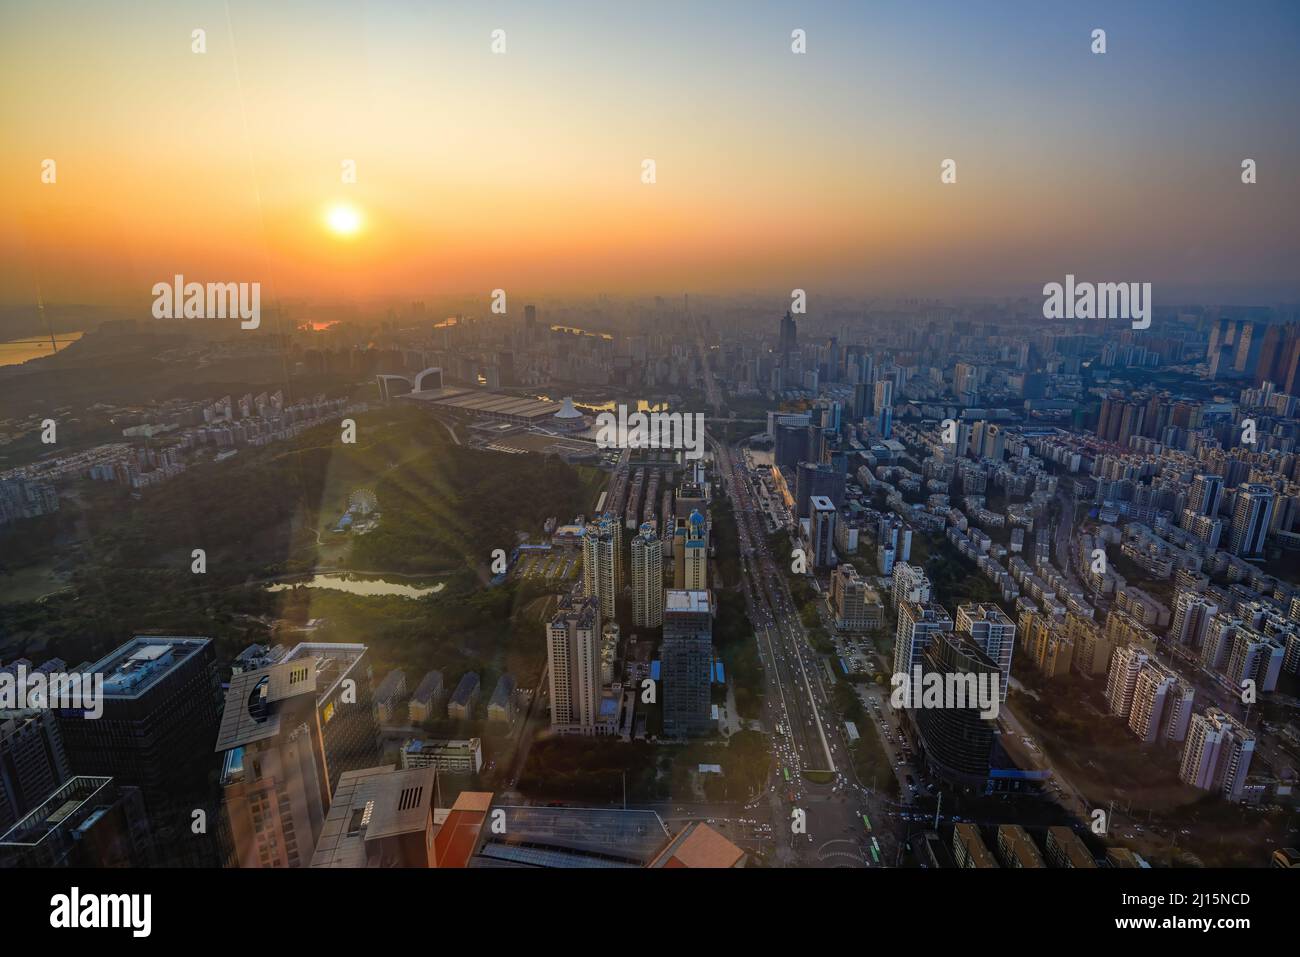 Cityscape of evening sunset in Nanning, Guangxi, China, viewed from above Stock Photo